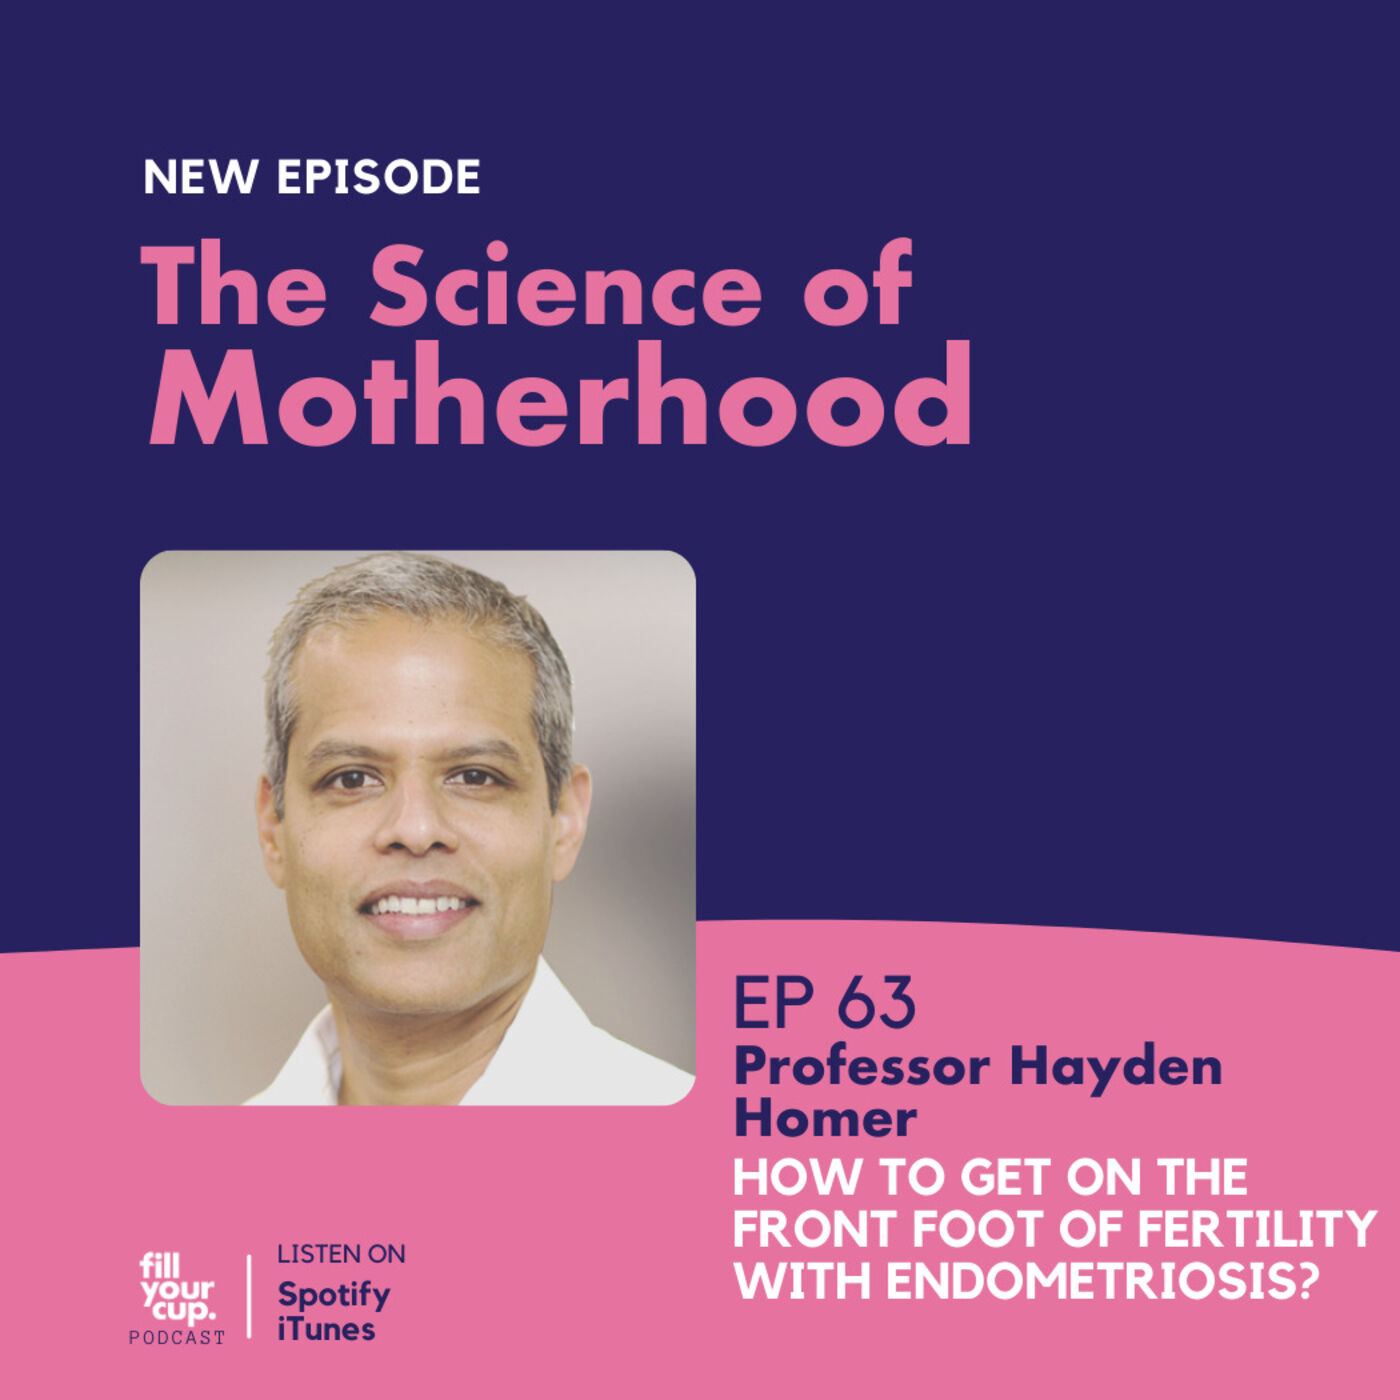 EP 63. Professor Hayden Homer - How to get on the front foot of fertility with endometriosis